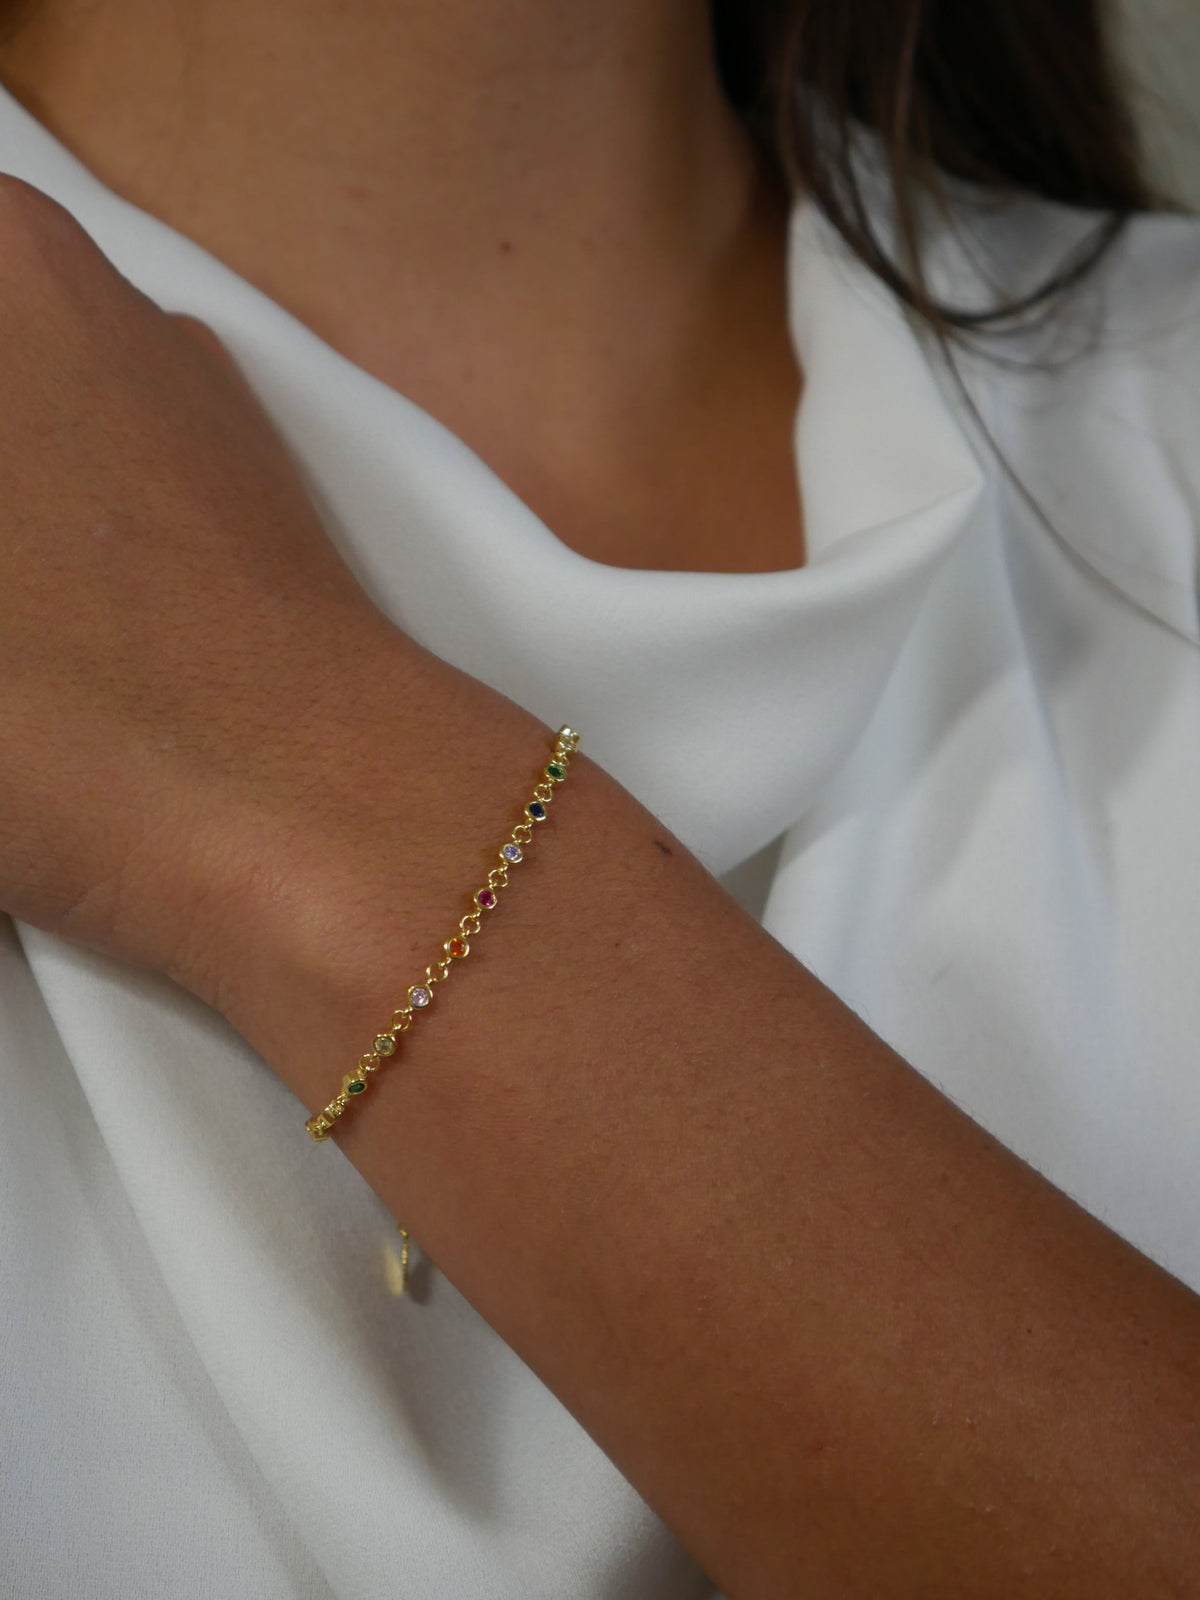 bracelet, bracelets, gold bracelet, cute bracelets, womens jewelry, jewelry, birthday gifts, anniversary gifts, holiday gifts, graduation gifts, nice bracelets, fashion jewelry, fine jewelry, nice bracelets, colorful rhinestone jewelry, colorful rhinestone bracelets, jewelry websites, gold plated jewelry, dainty bracelets, gold accessories, tarnish free jewelry, nice bracelets, designer bracelets, sterling silver bracelets, 925 bracelet, bracelet ideas, bracelet stacking